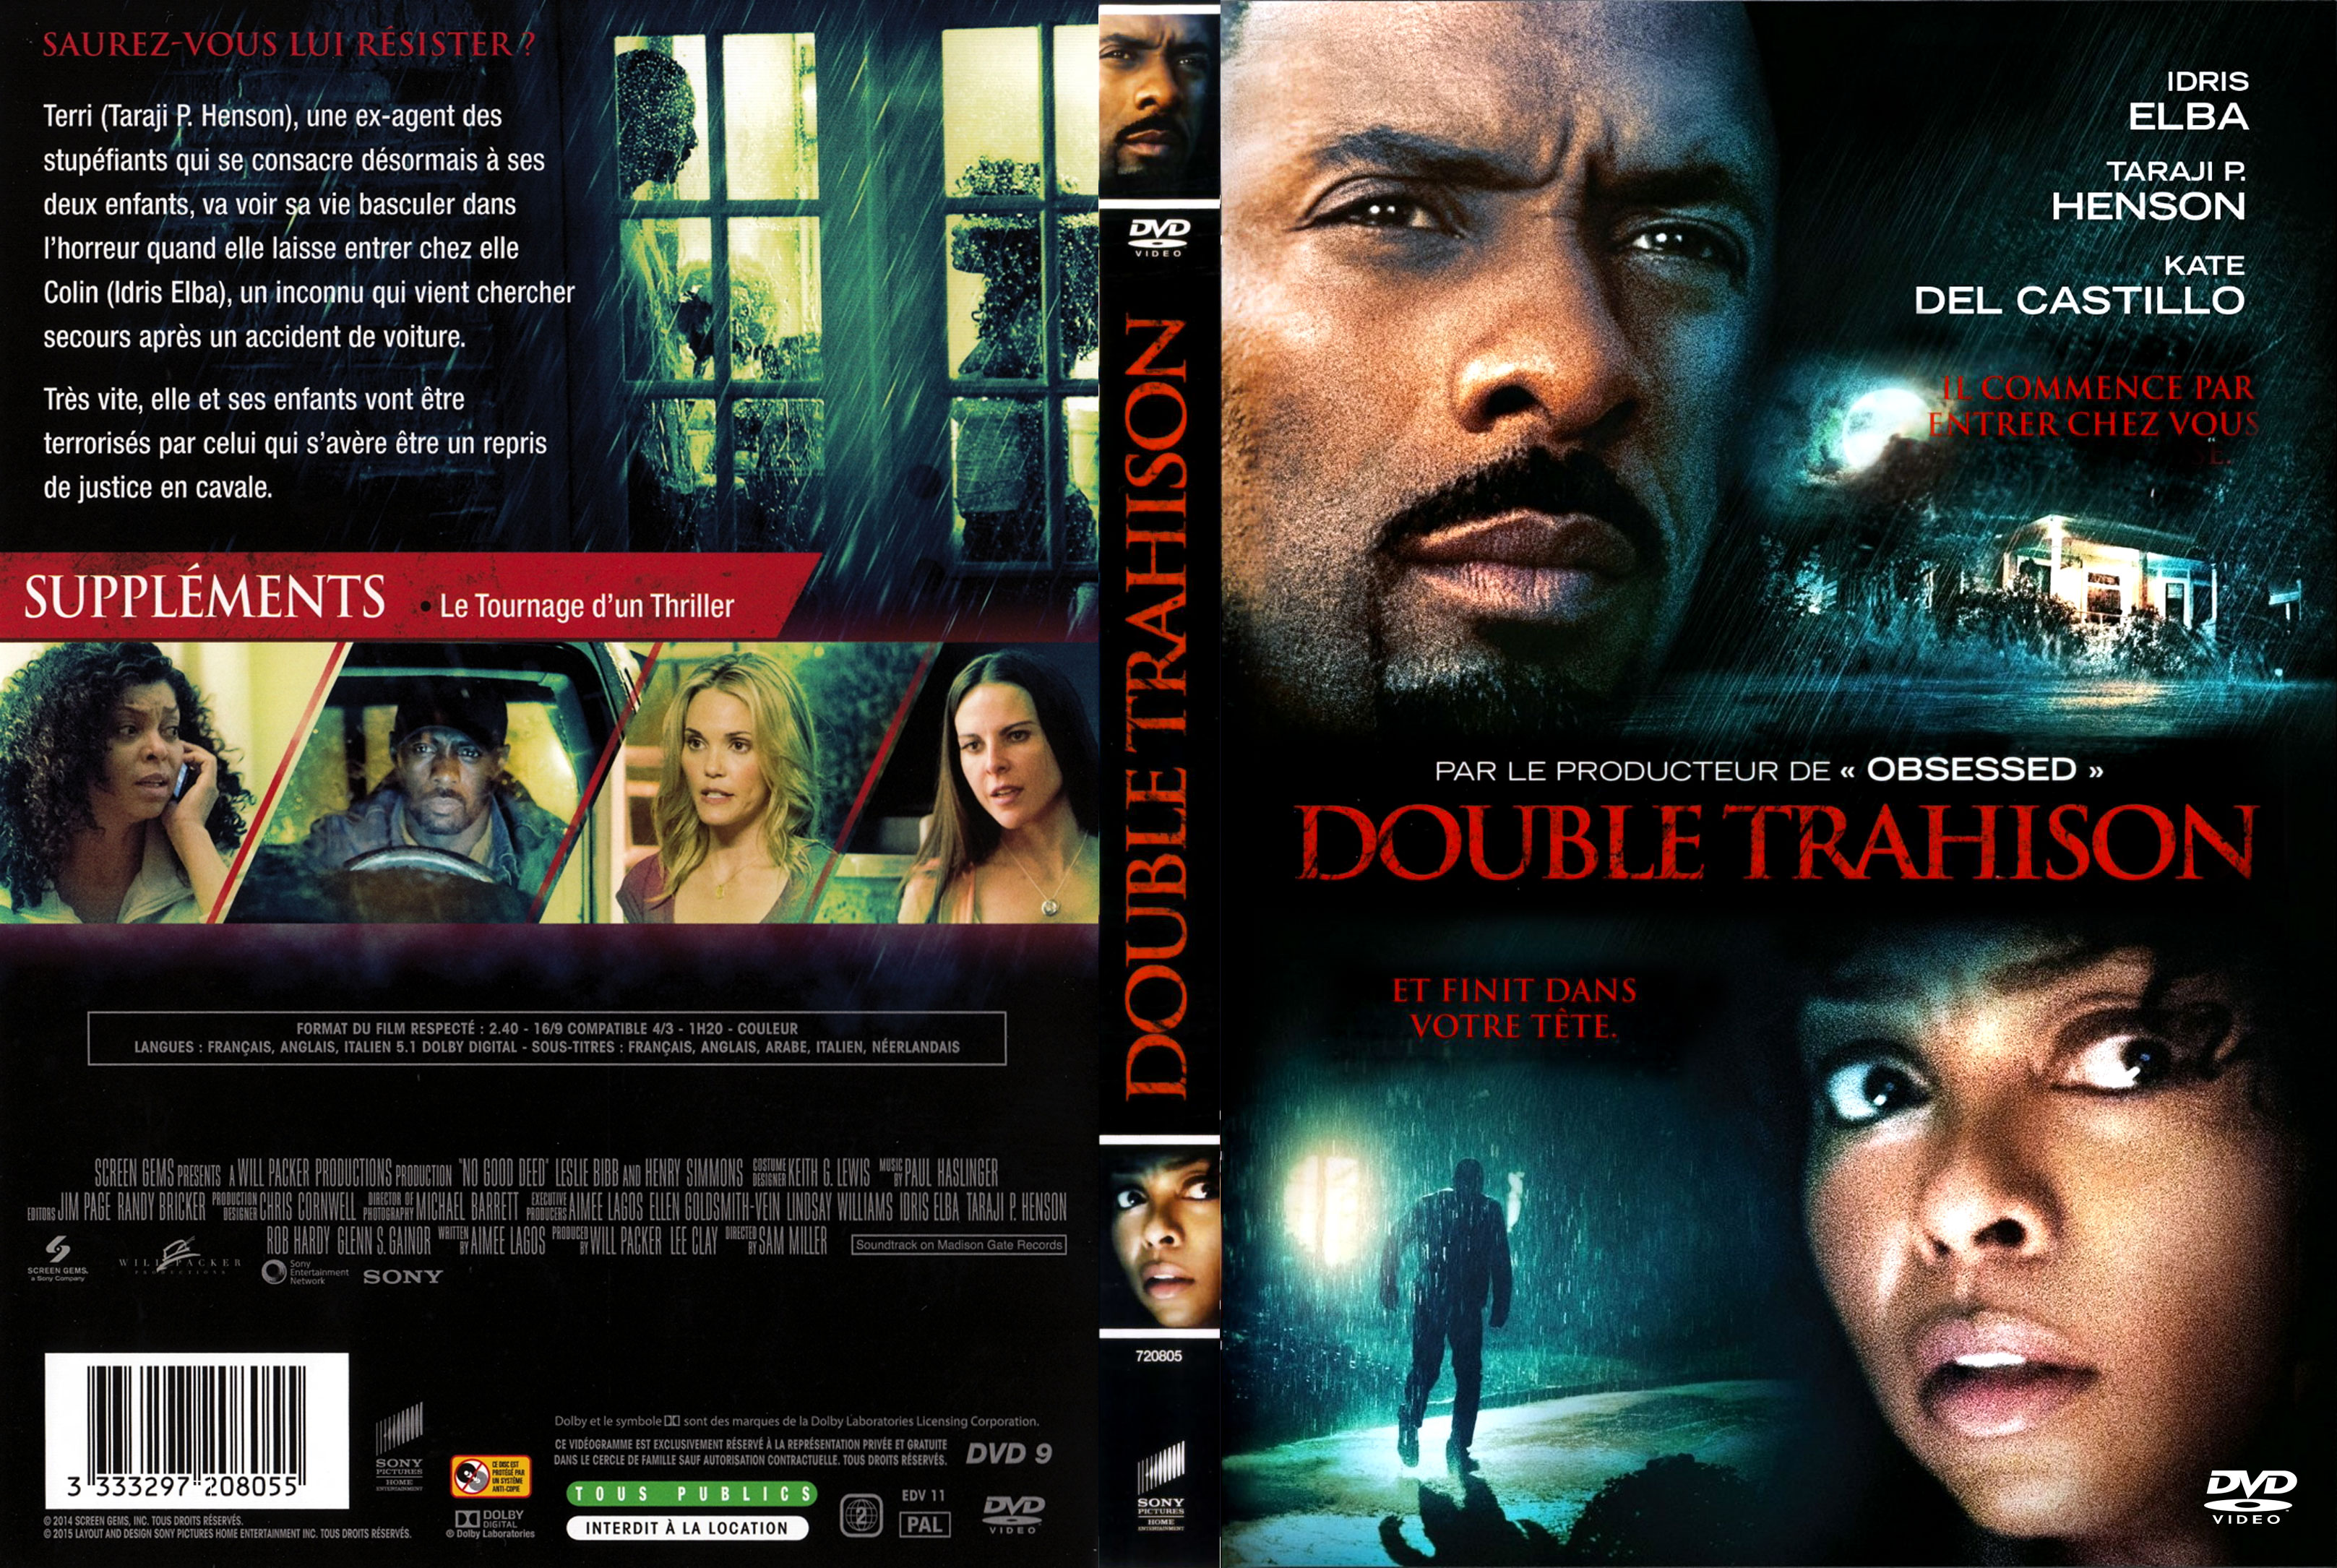 Jaquette DVD Double trahison - No Good Deed